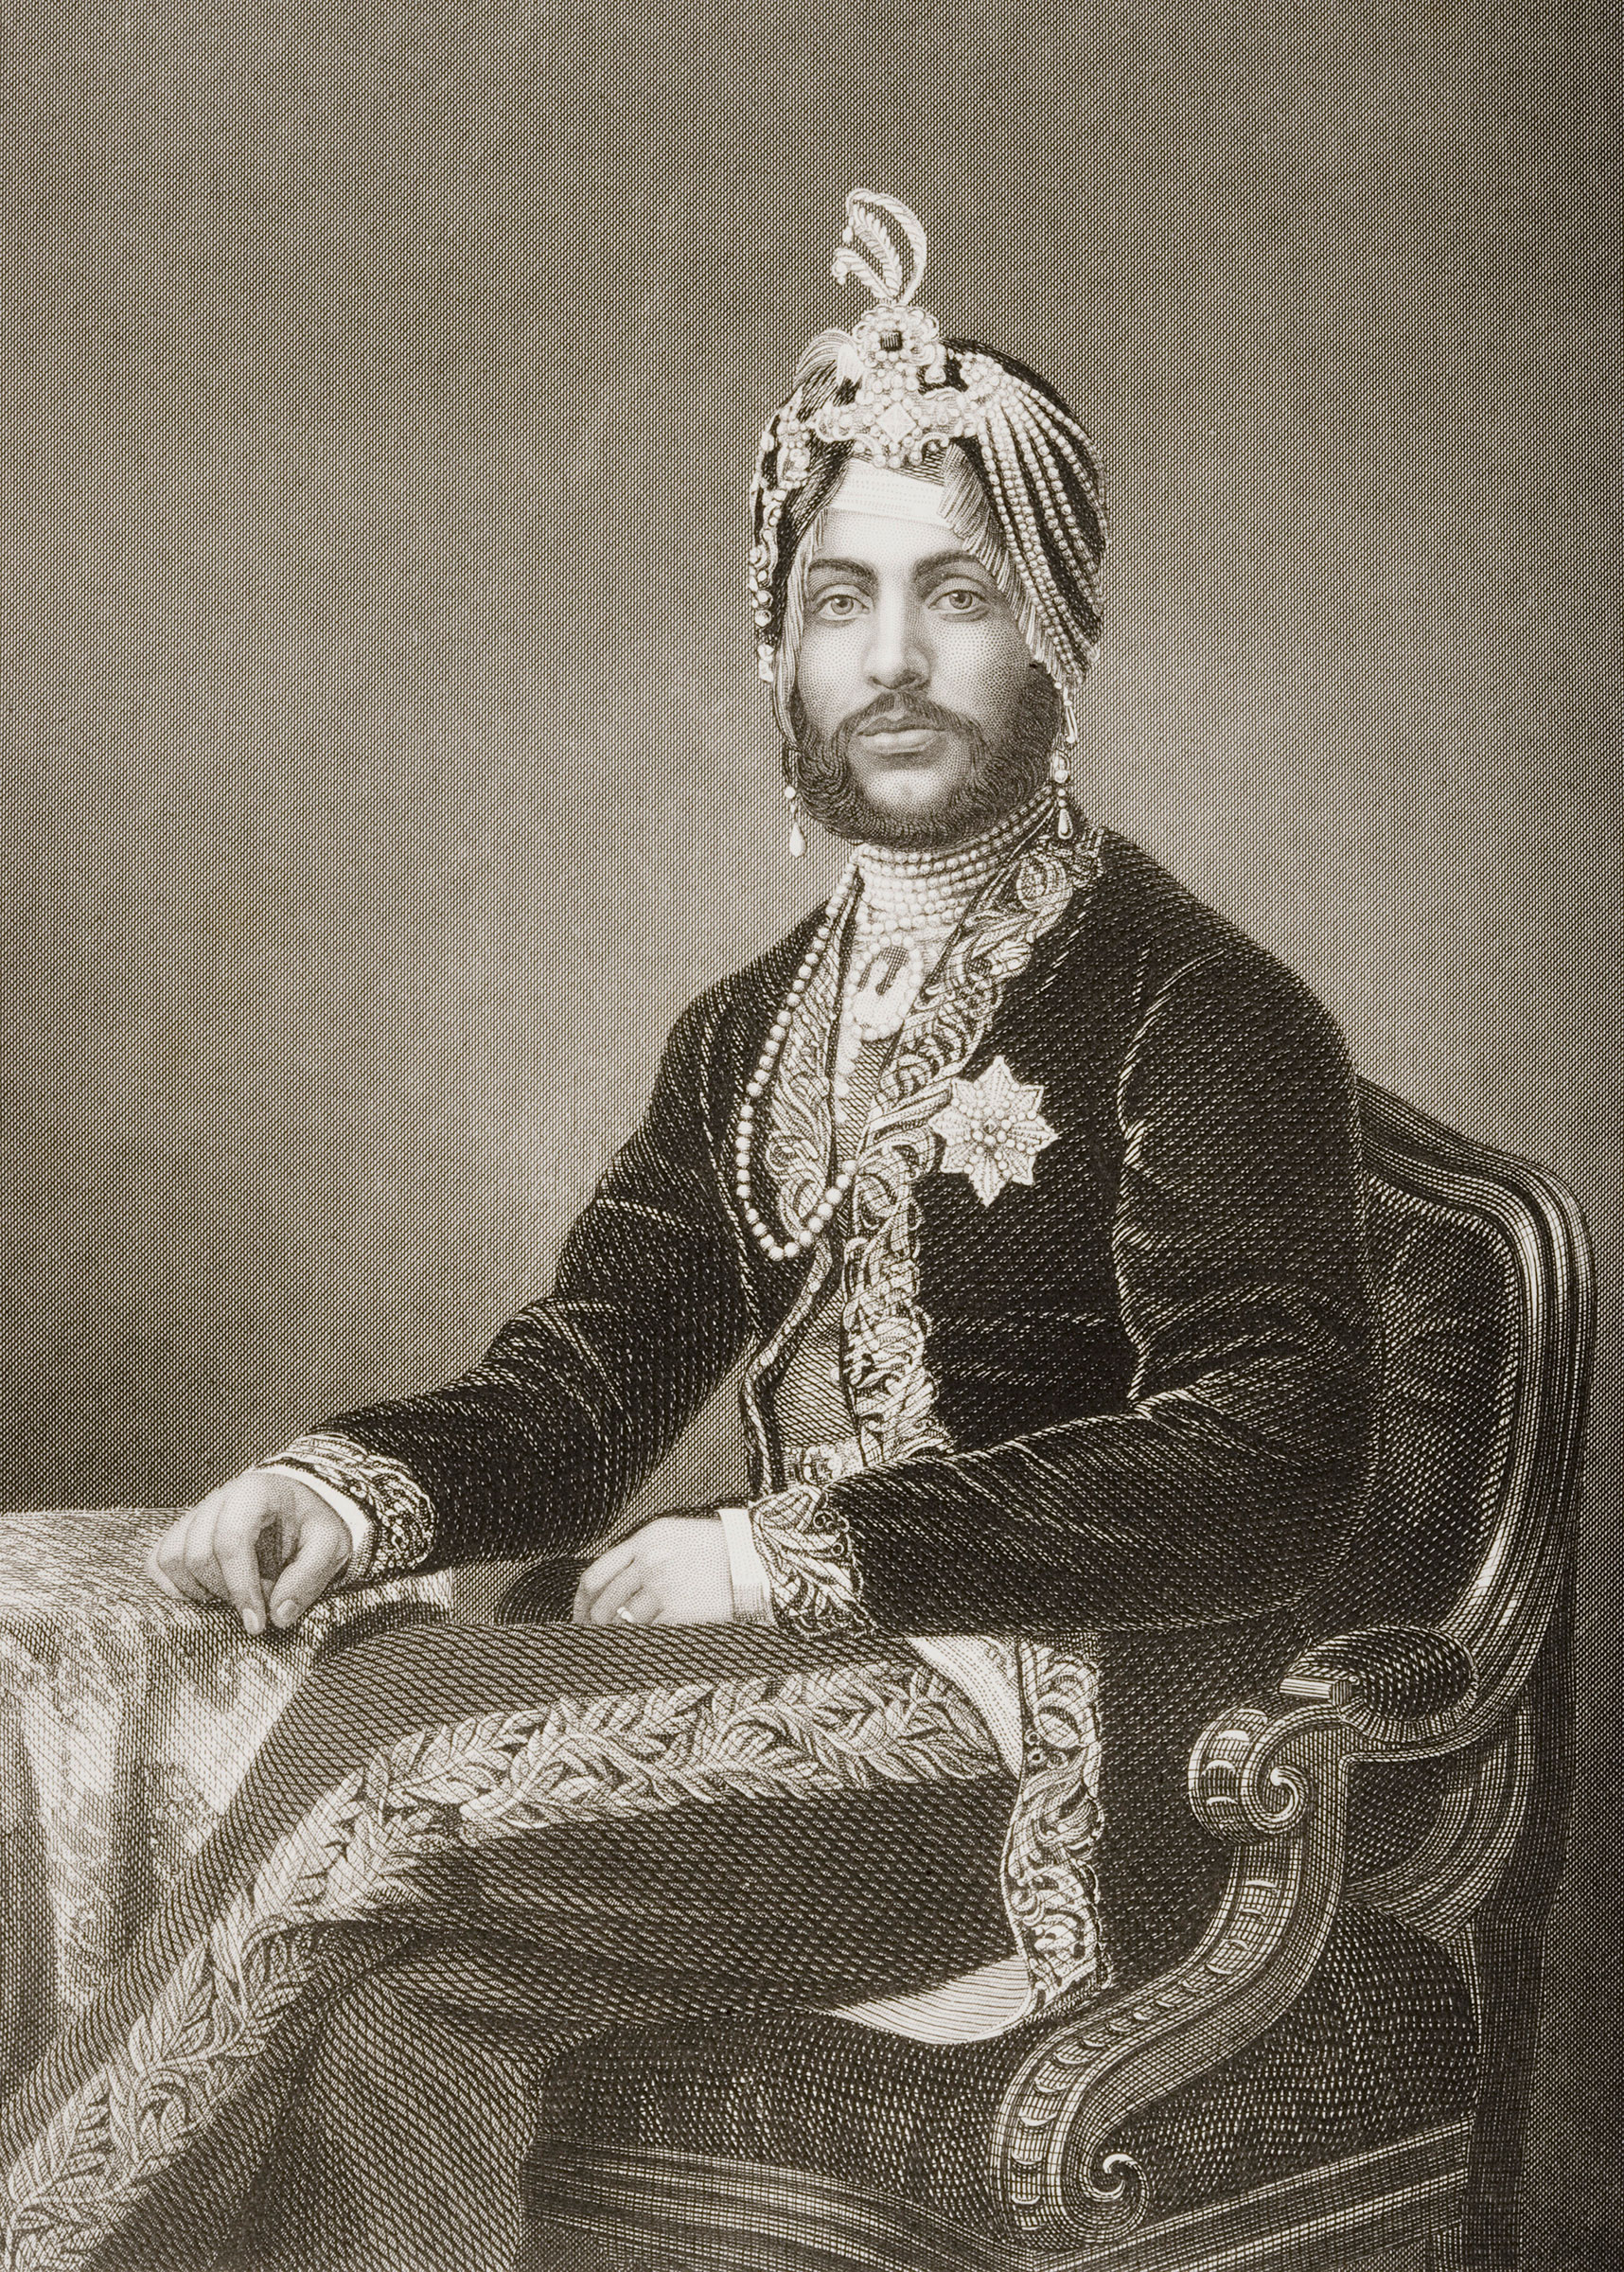 Duleep Singh, Maharajah of Lahore, 1837-1893. Engraved by D.J. Pound from a photograph by Mayall. From the book 